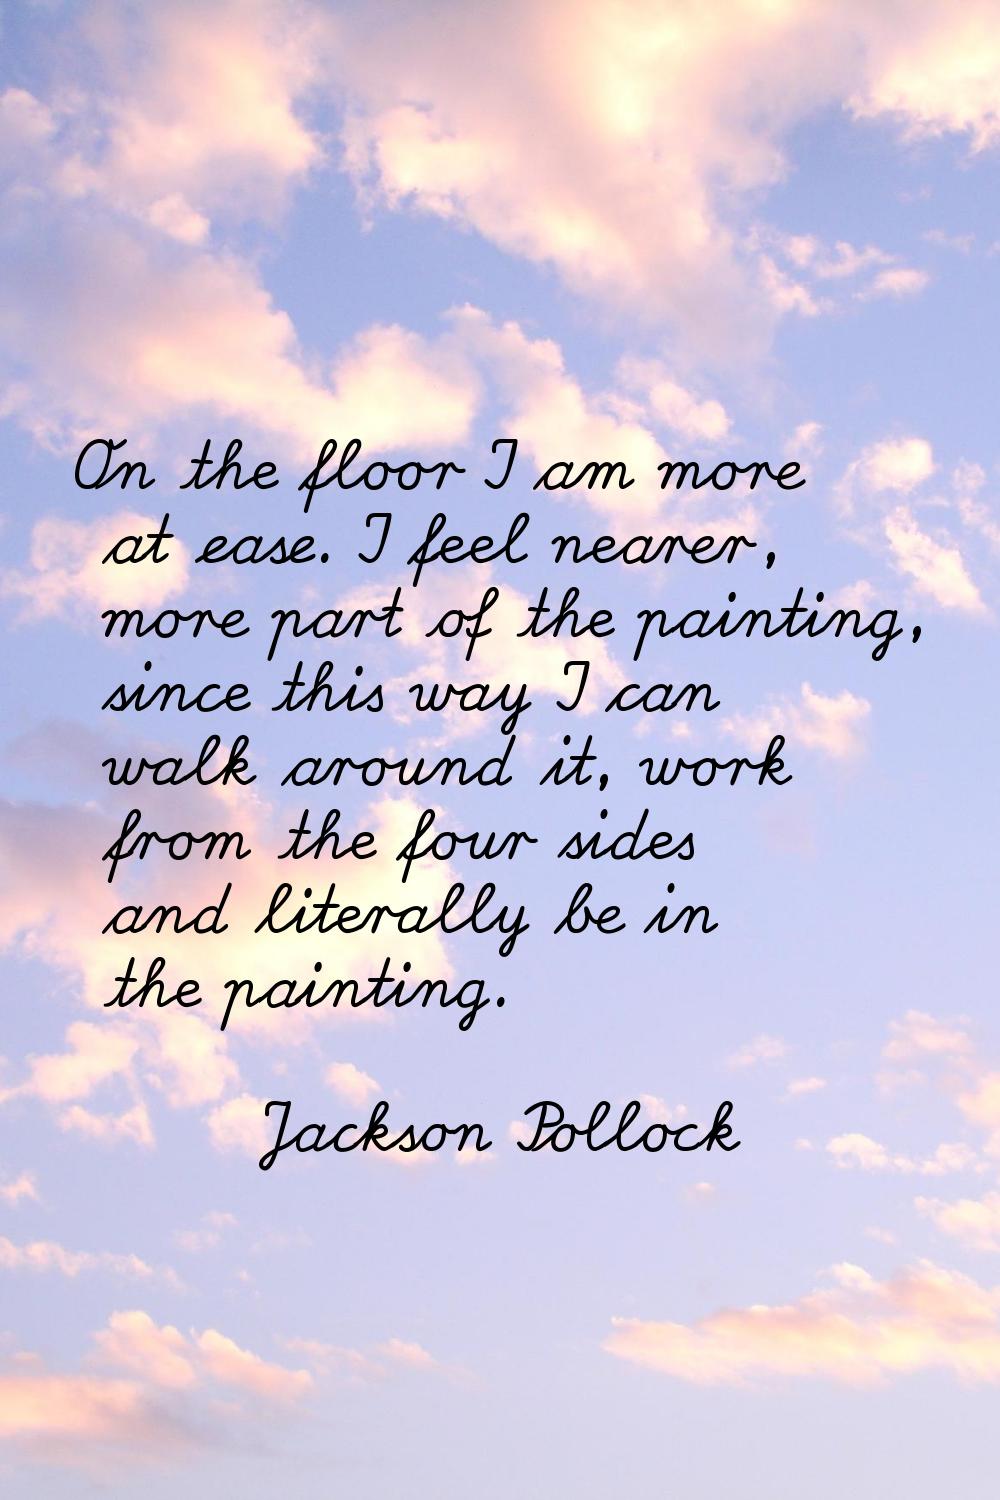 On the floor I am more at ease. I feel nearer, more part of the painting, since this way I can walk